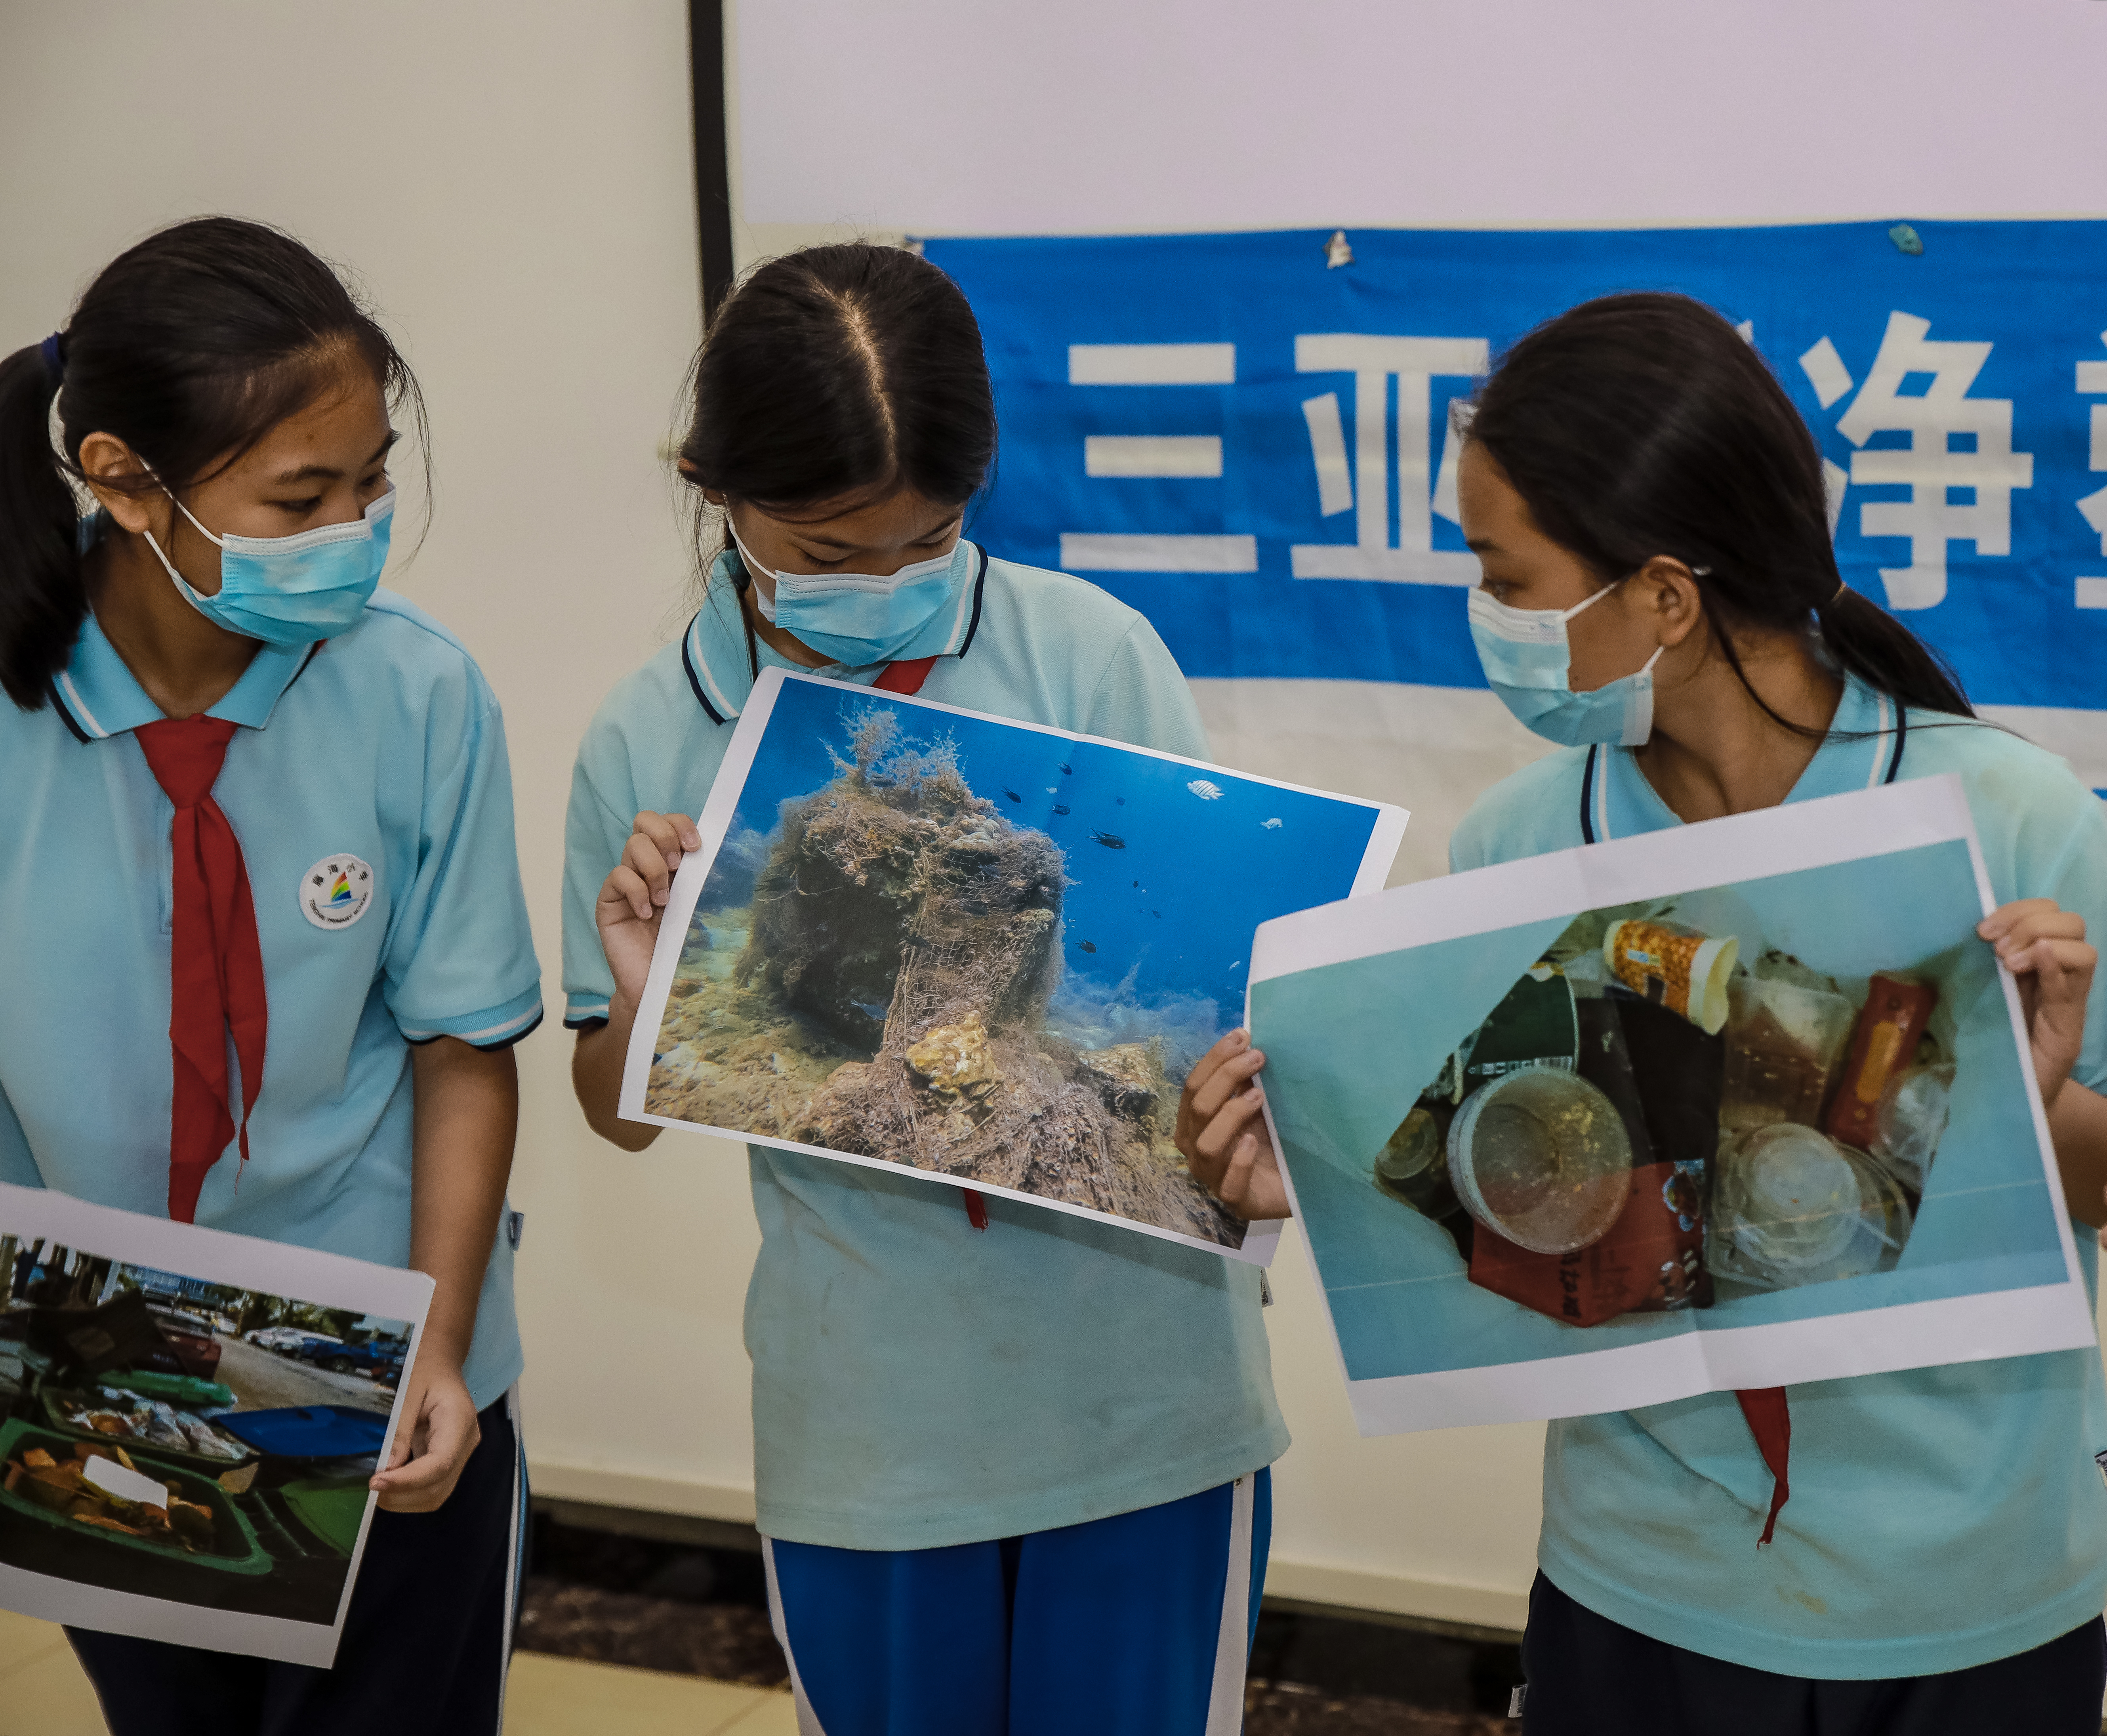 Student volunteers presenting pictures depicting plastic pollution in the ocean. /Blue Ribbon